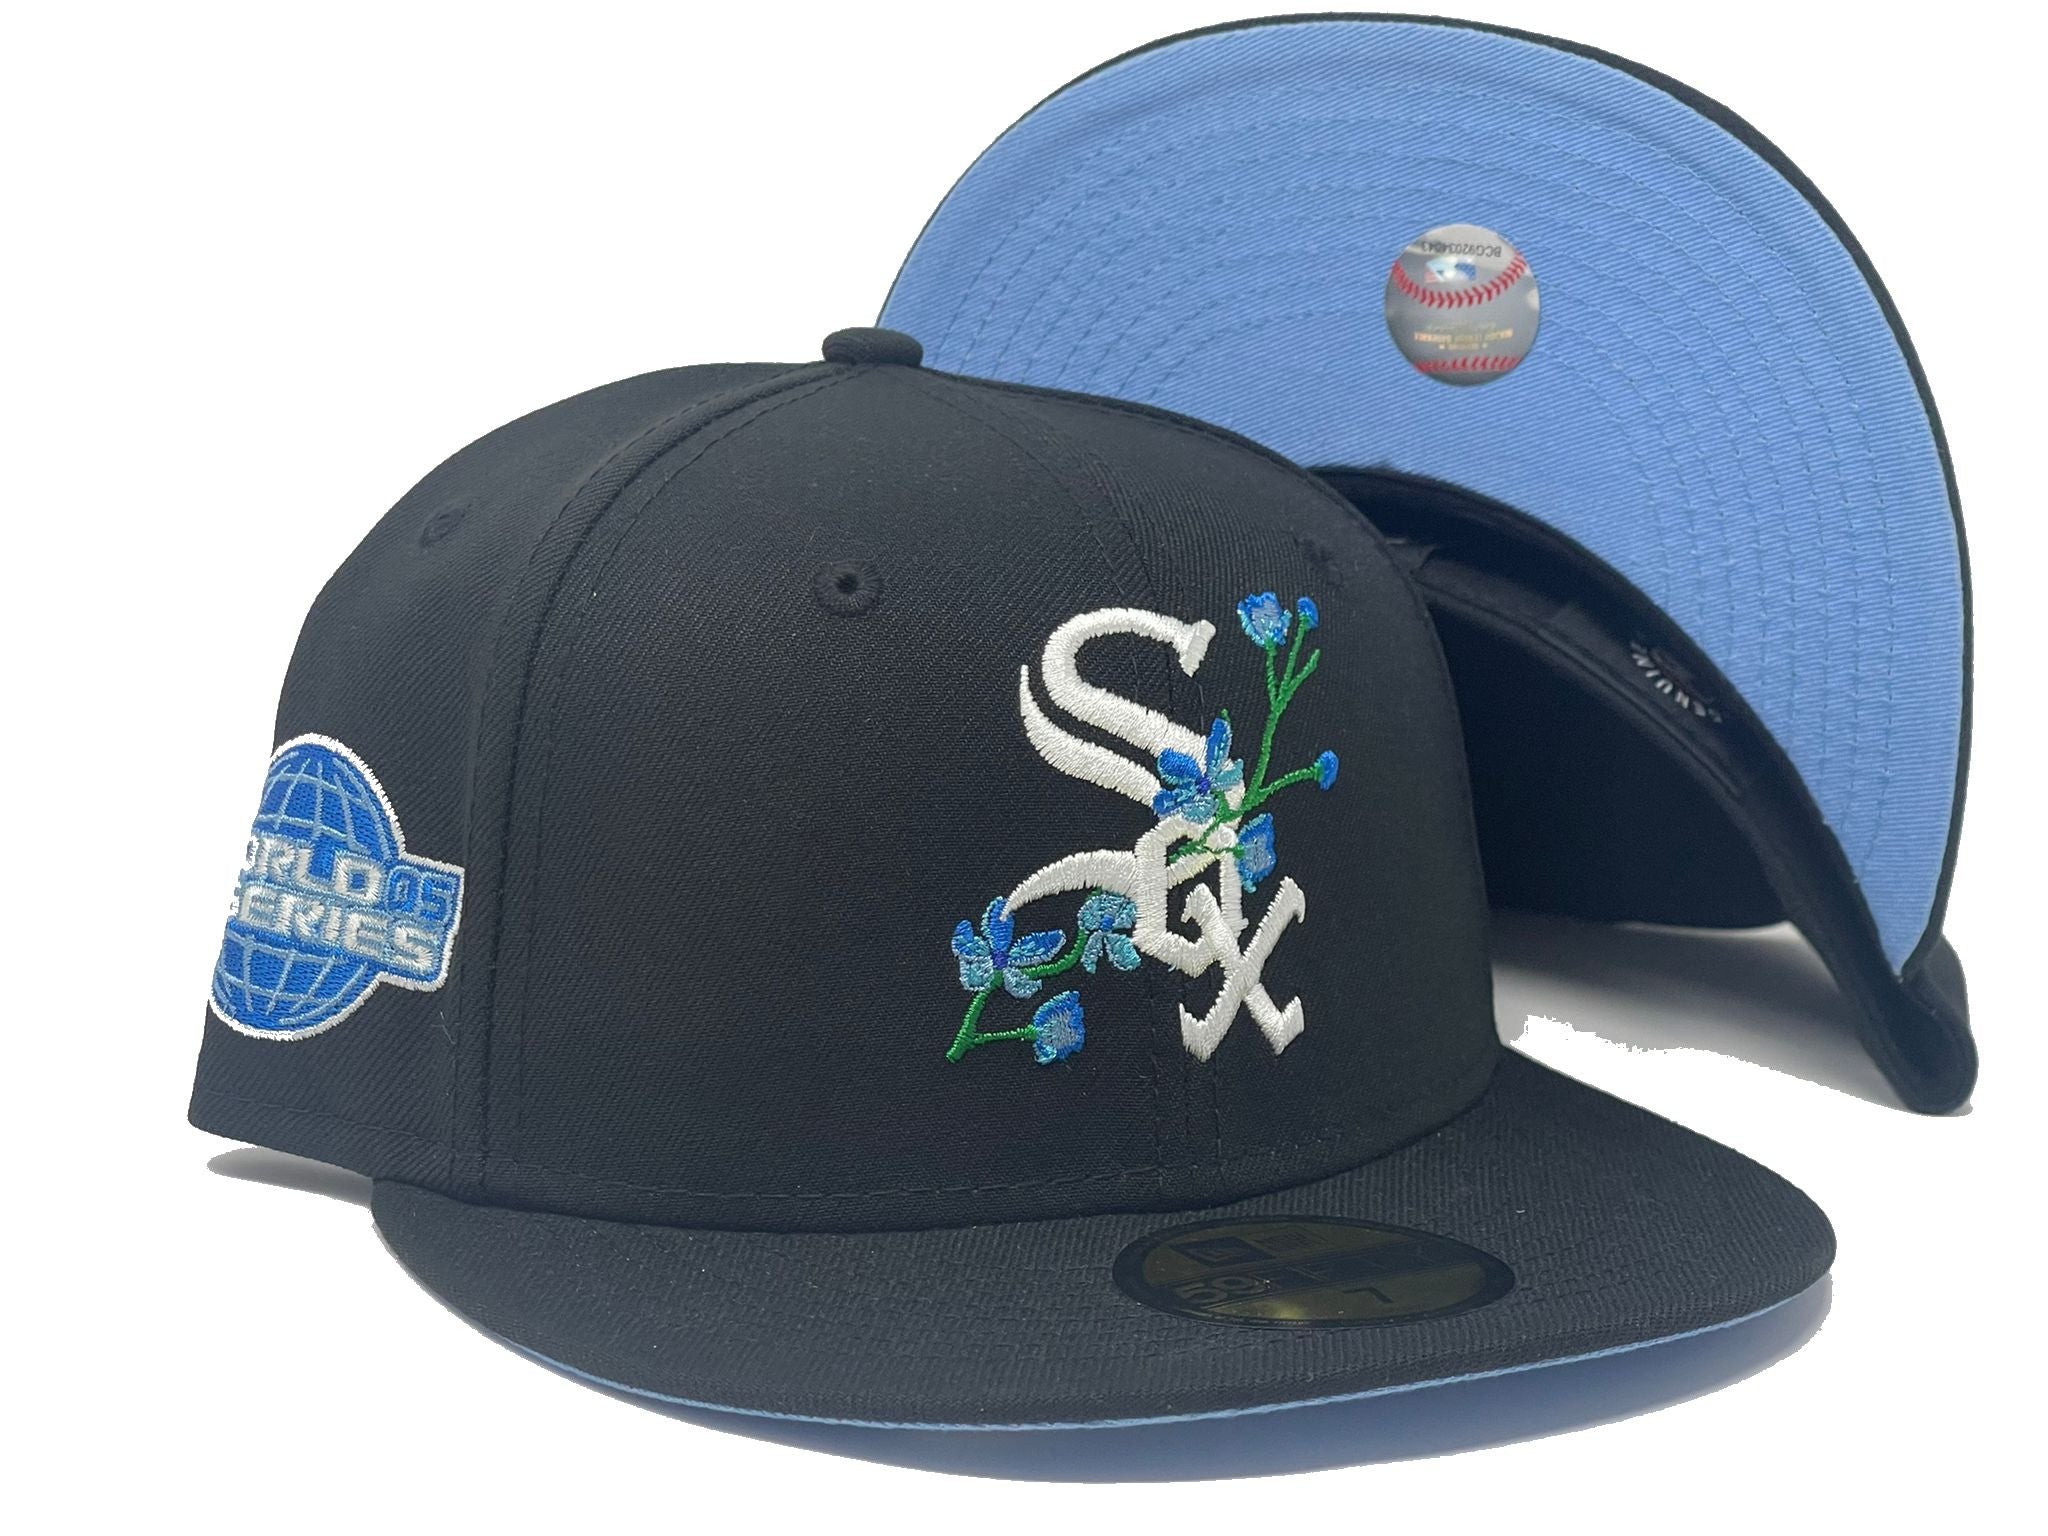 Chicago White Sox Size 7 1/8 New Era 59FIFTY SKY BLUE 1906 WORLD SERIES  HAT W/CHICAGO CUBS LOGO!(NWT) EXTREMELY RARE, COLLECTOR'S ITEM! for Sale in